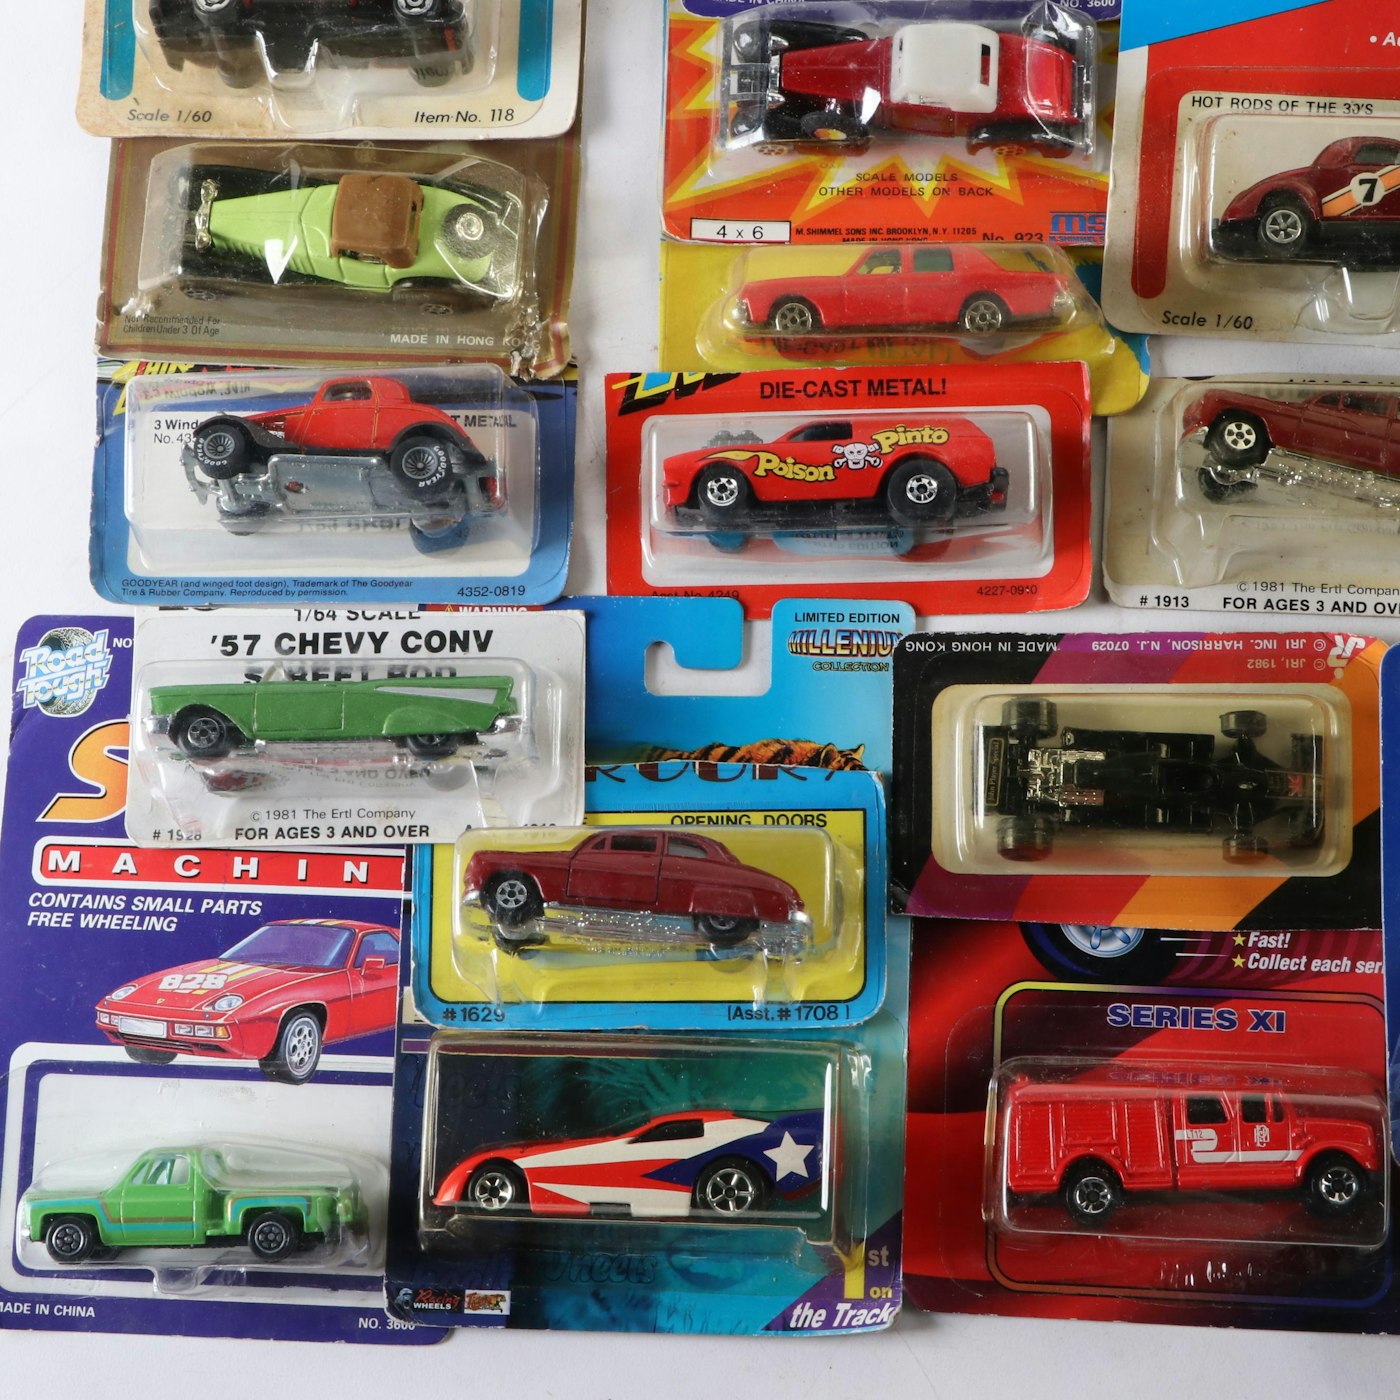 Mattel, Tough Wheels, Racing Champions and More Diecast Toy Cars | EBTH